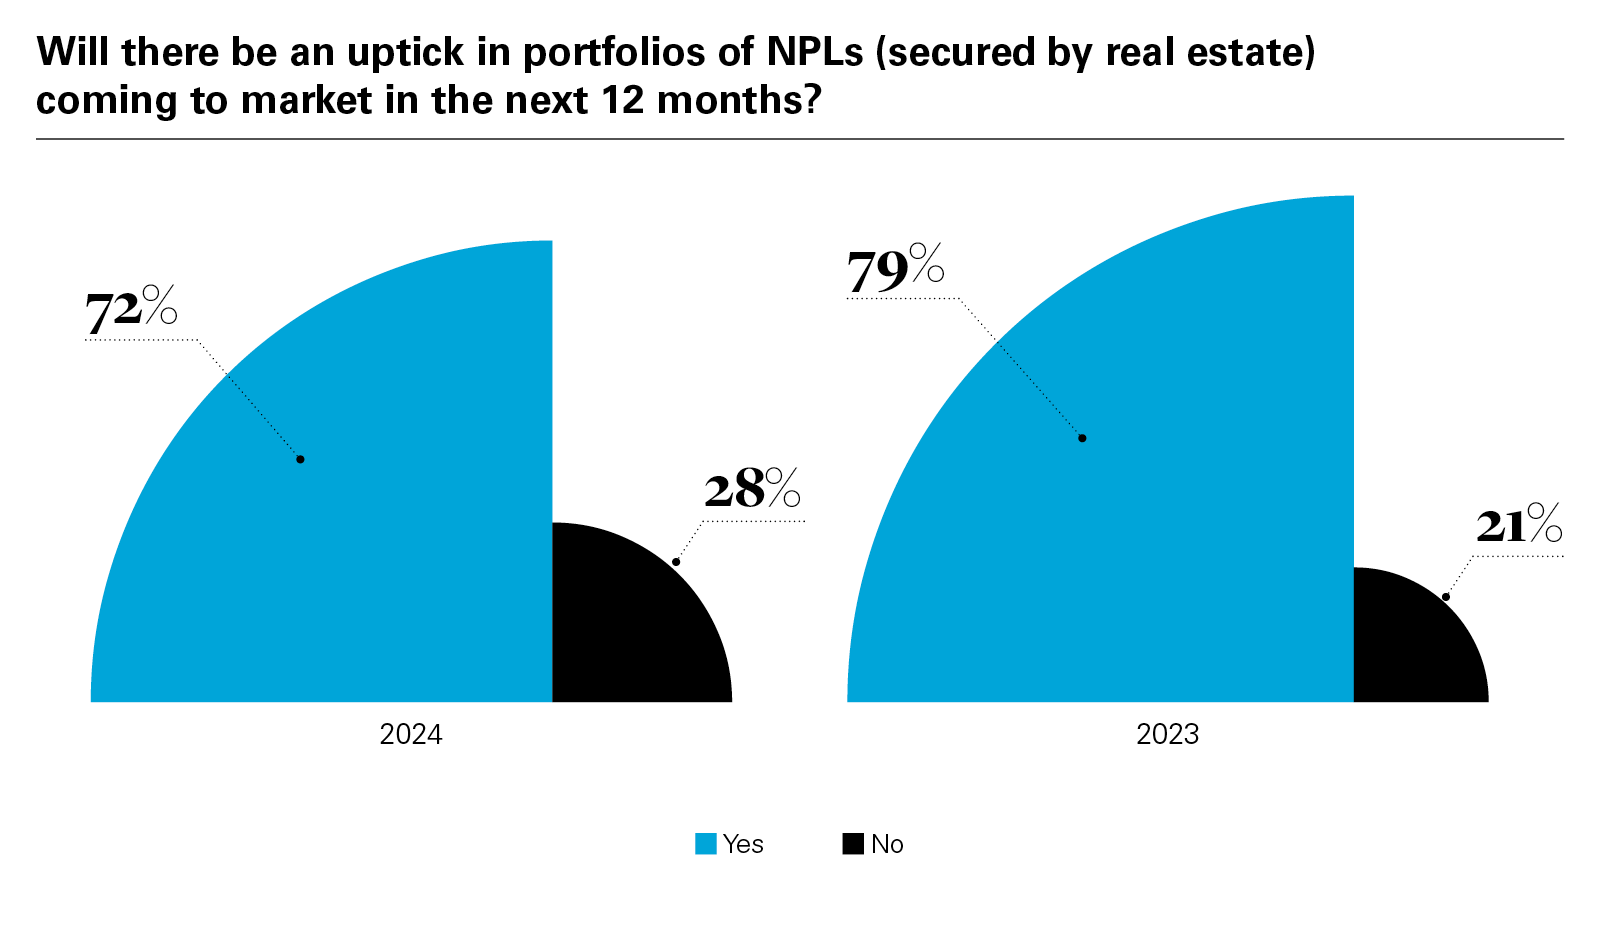 Will there be an uptick in portfolios of NPLs (secured by real estate) coming to market in the next 12 months?